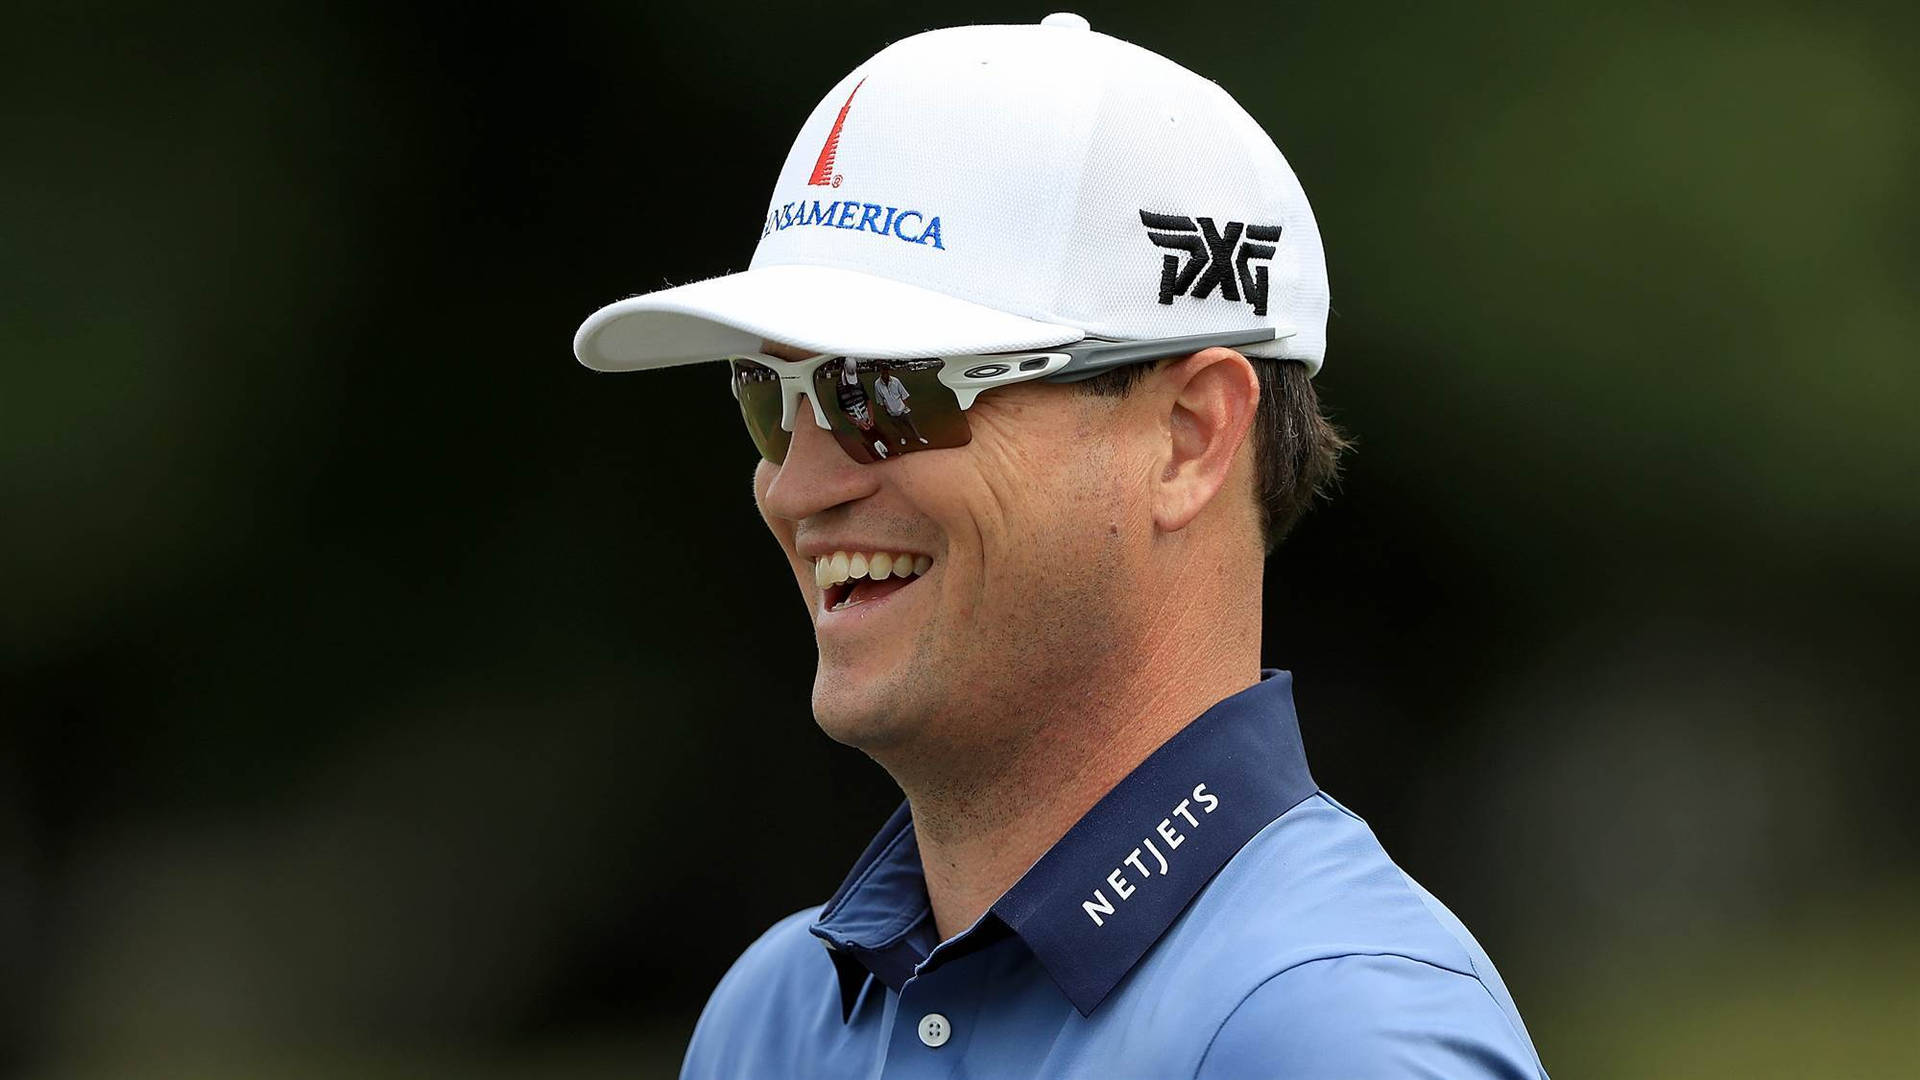 Zach Johnson with a Winning Smile Wallpaper